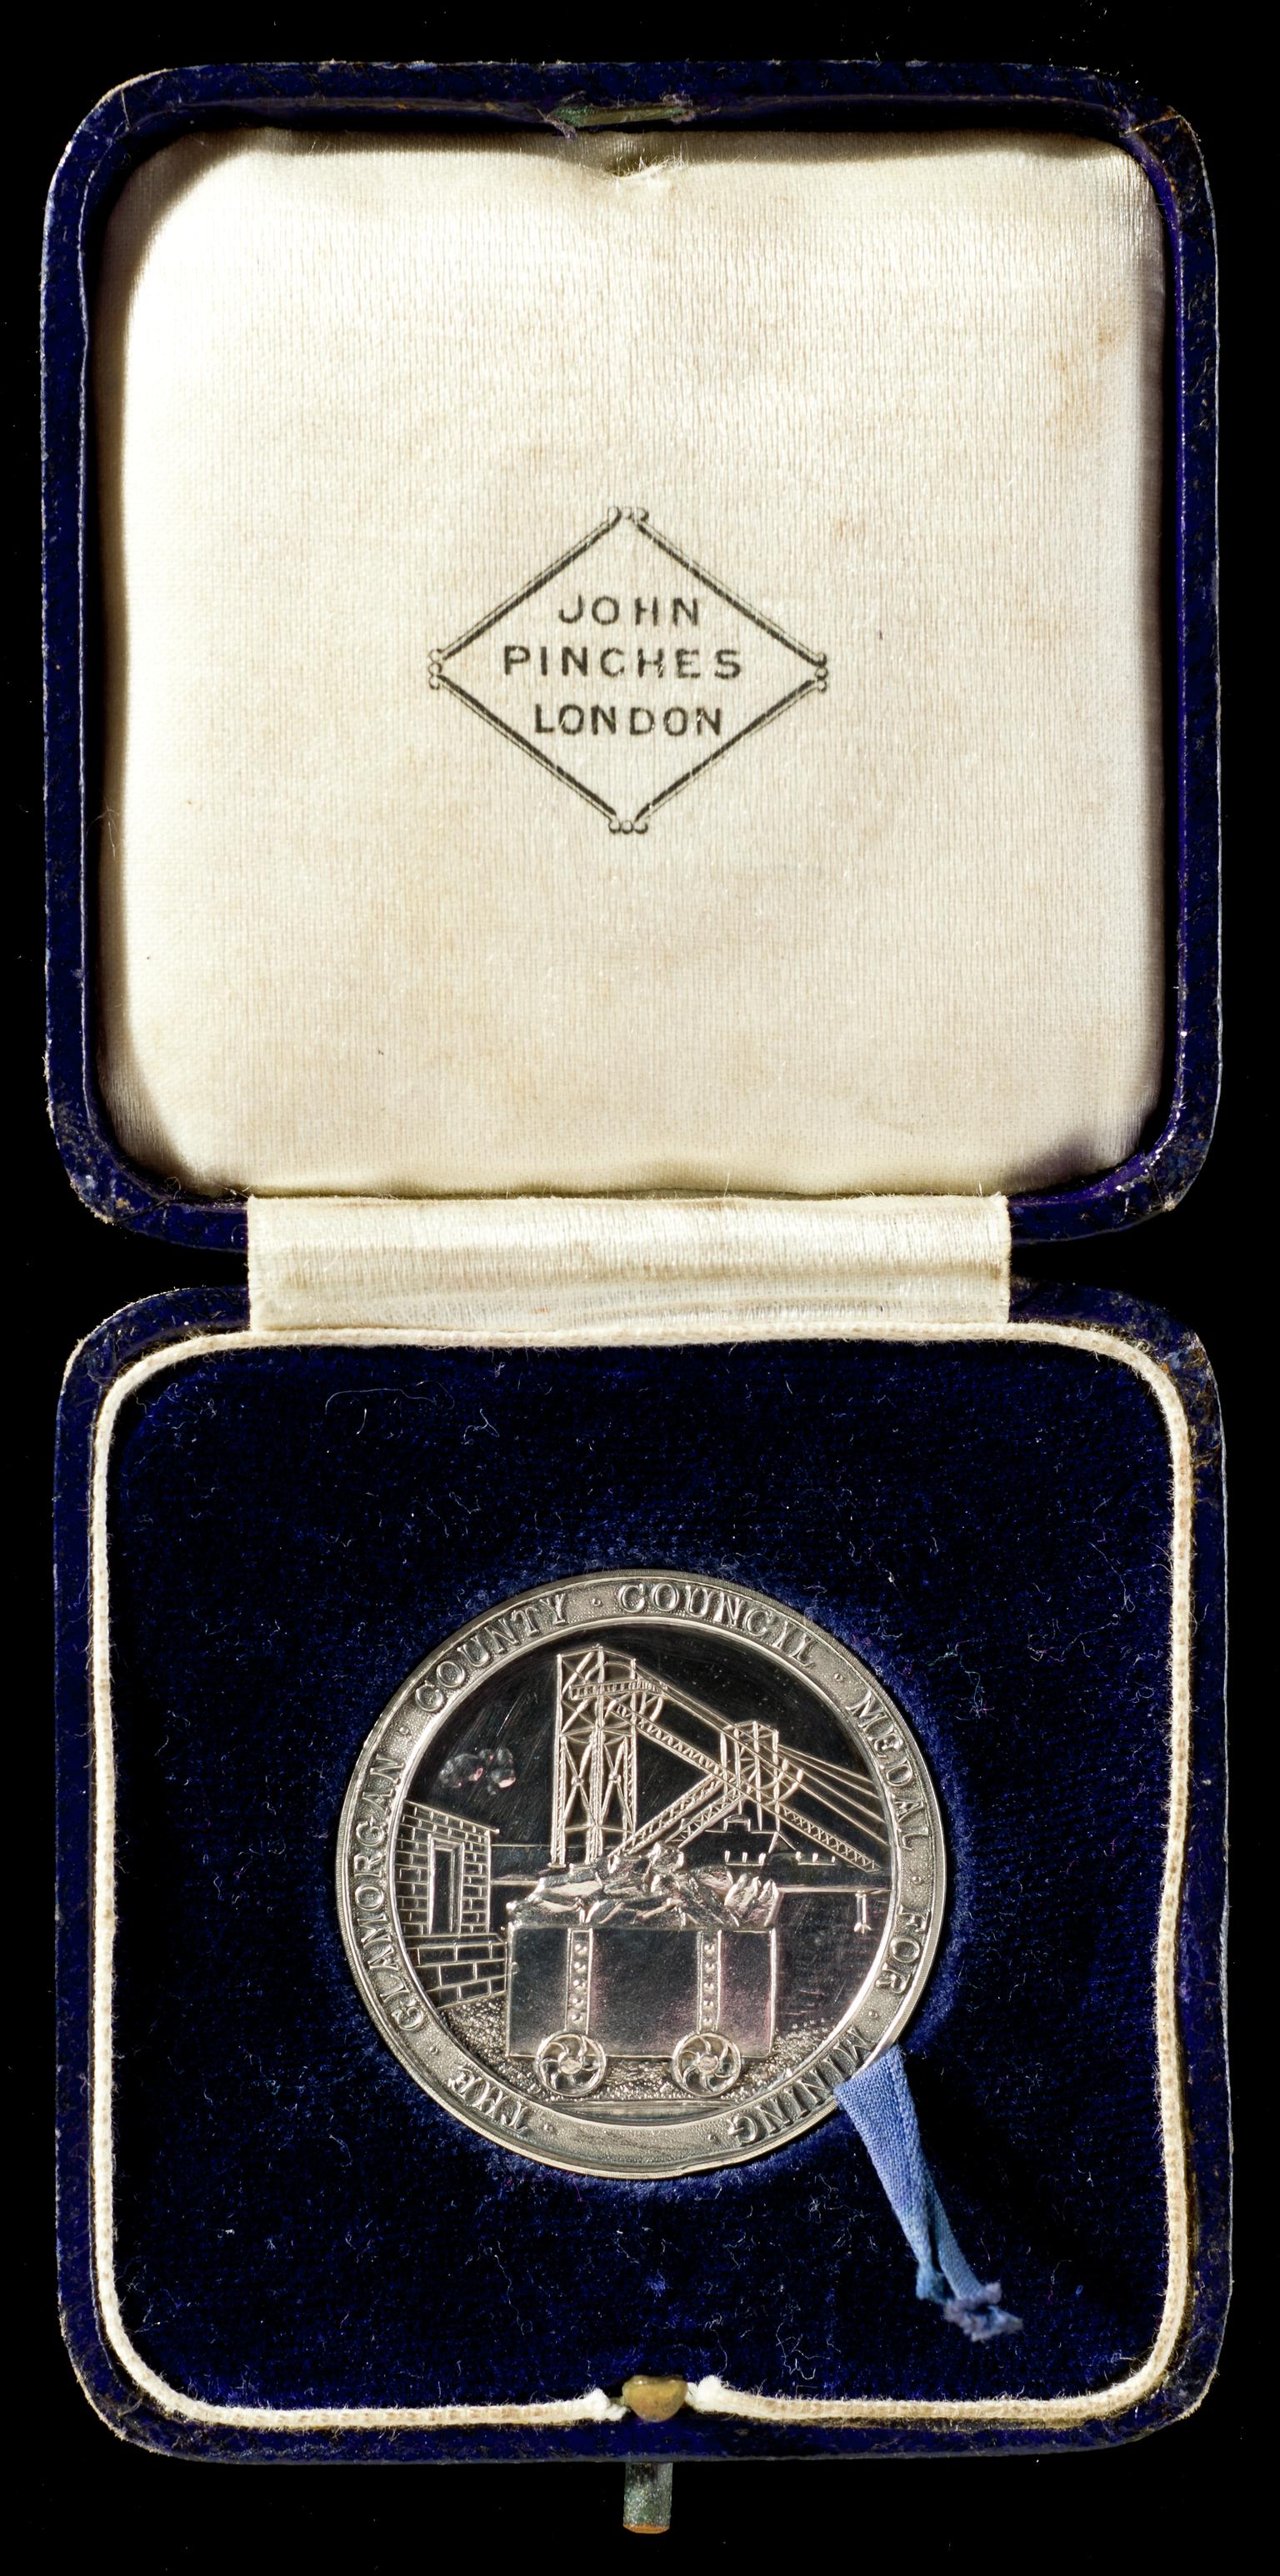 Glamorgan County Council Medal for Mining in its case